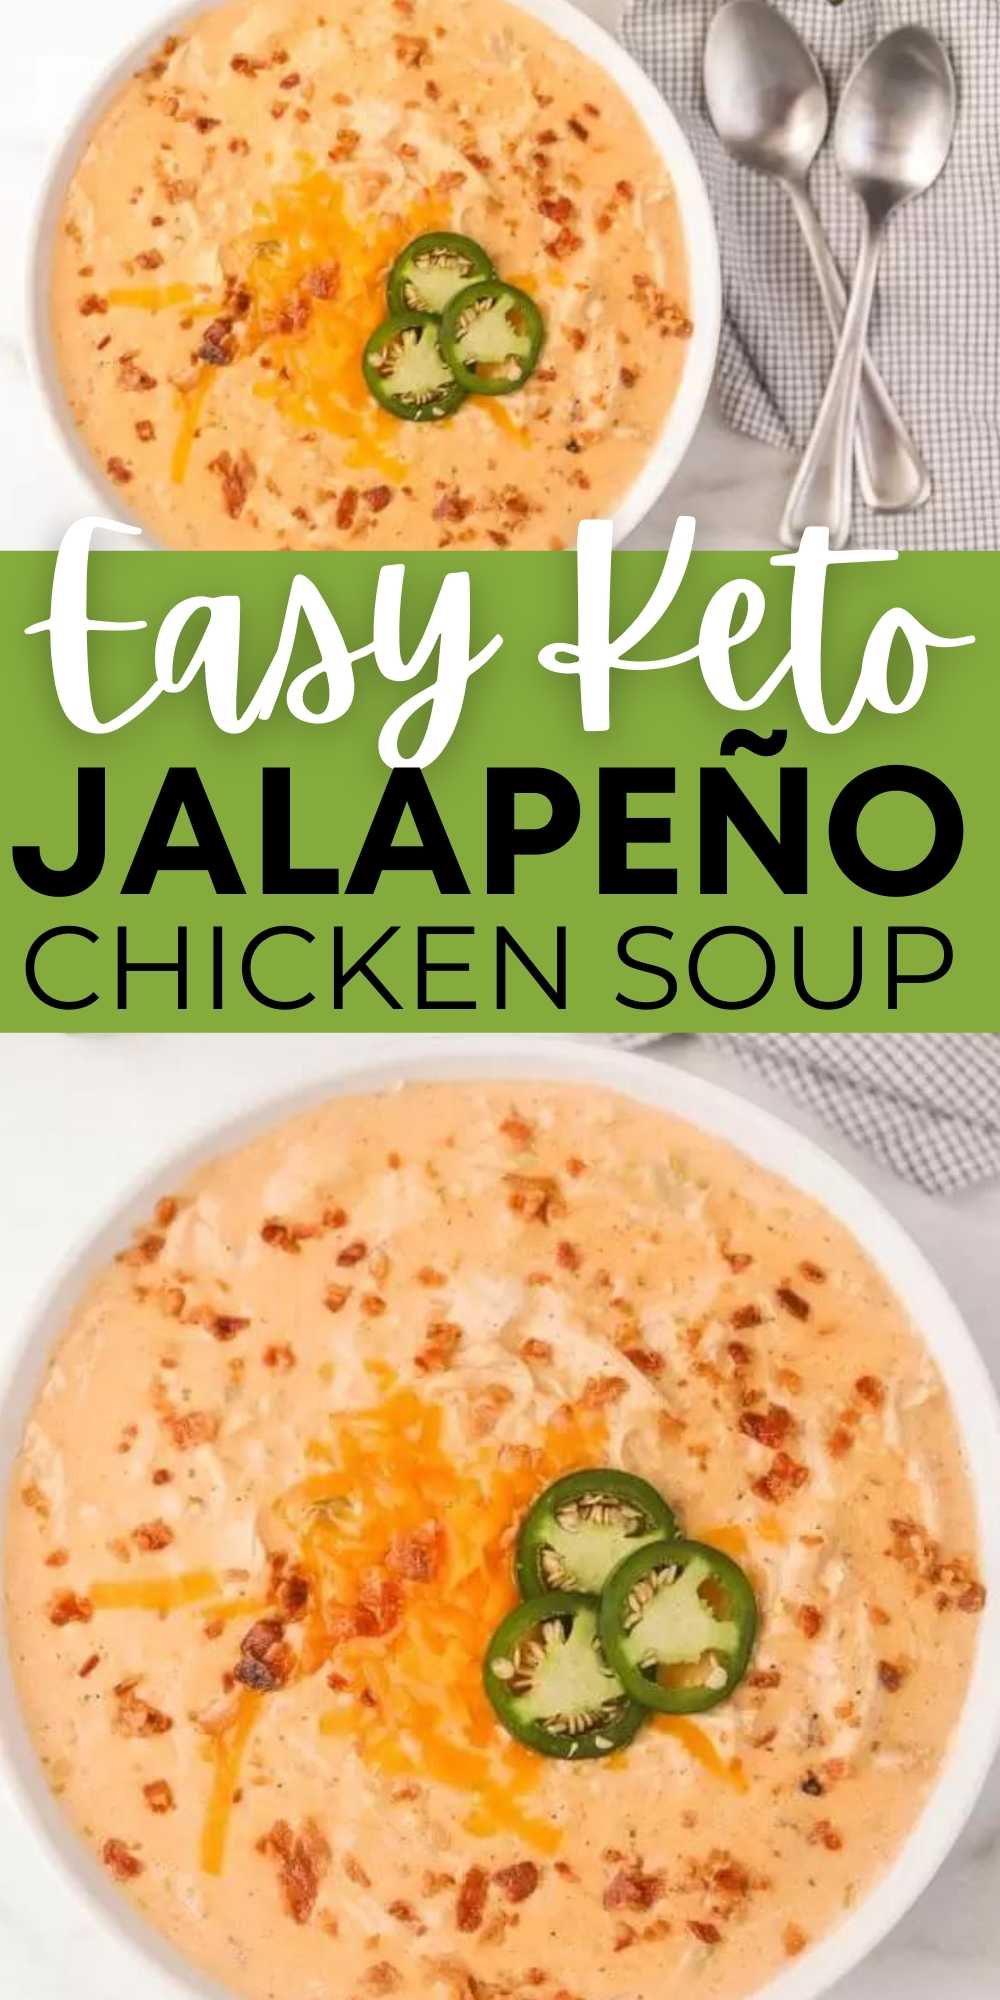 You are going to love this Keto Jalapeño Popper Chicken Soup Recipe in the instant pot or crockpot. It is low carb and is a crowd pleaser! This jalapeño popper chicken soup is easy to make and packed with tons of flavor too!  #eatingonadime #ketorecipes #lowcarbrecipes #souprecipes 
